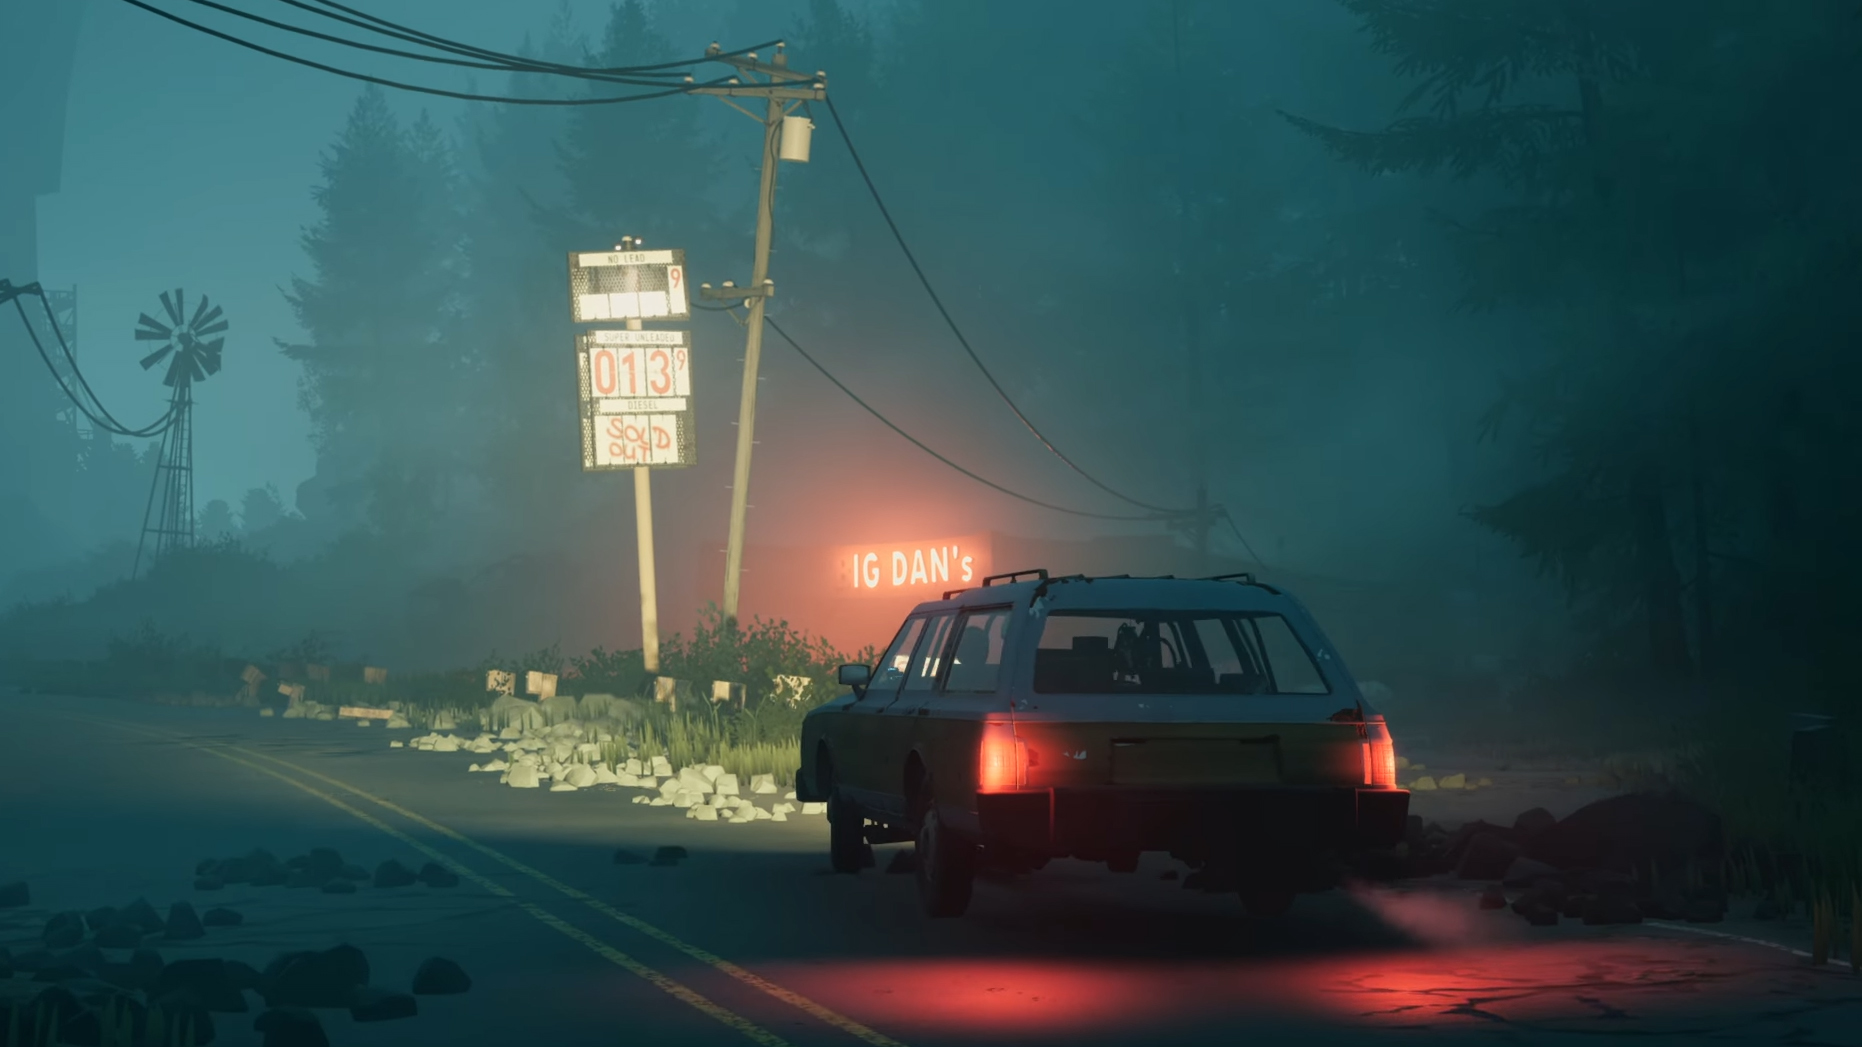 5 Sandbox Survival Games to Play Before State of Decay 3 Releases